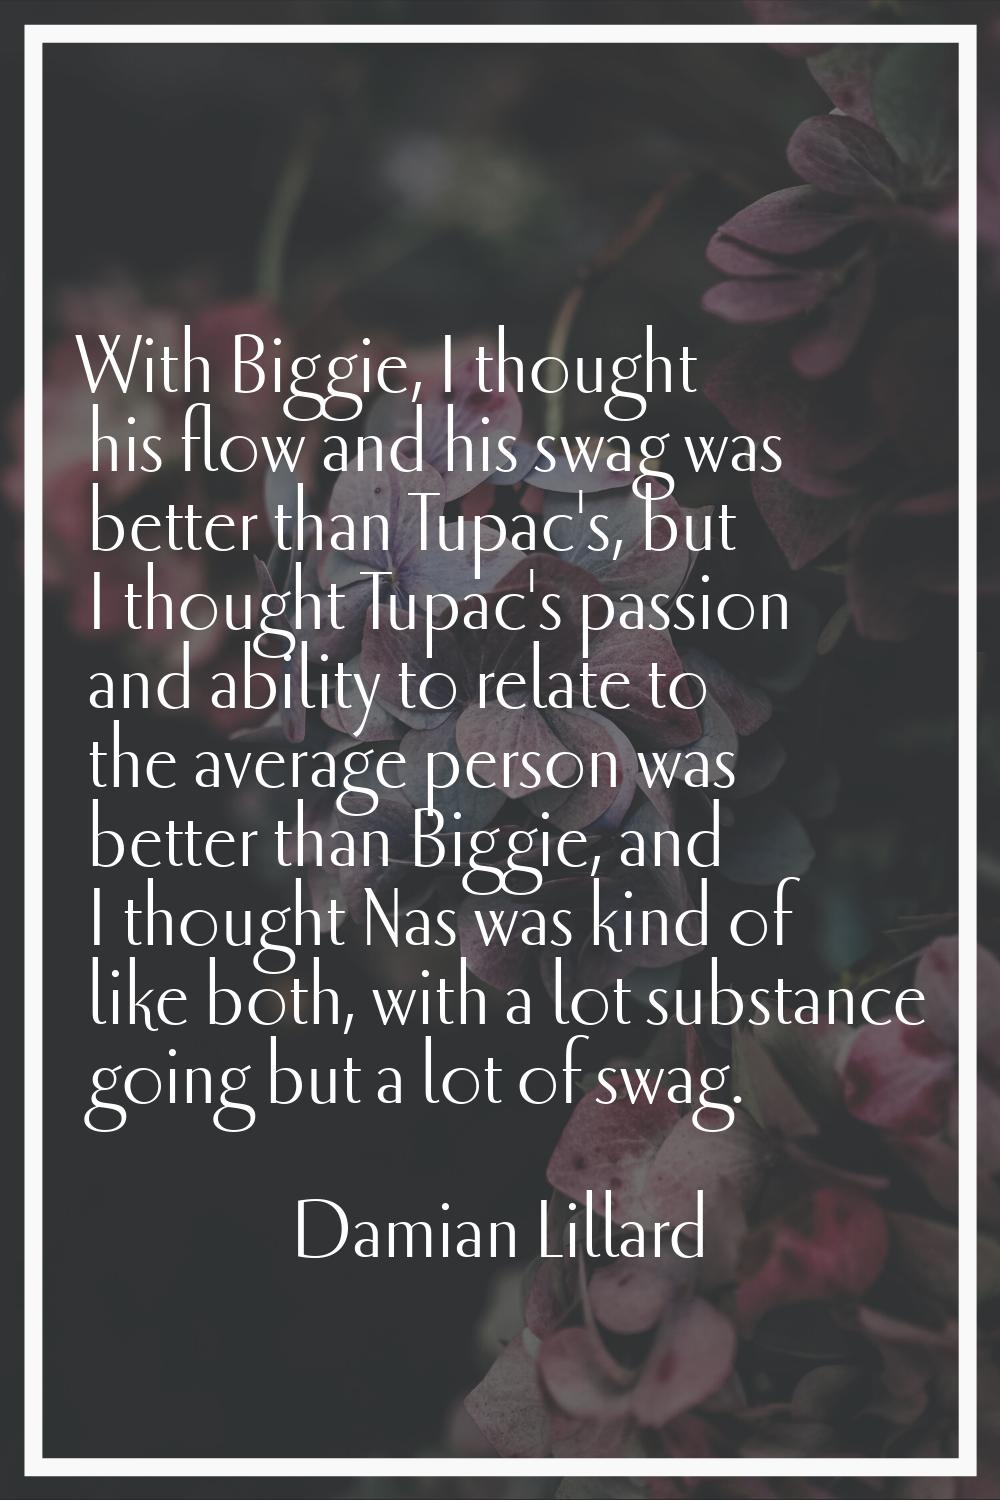 With Biggie, I thought his flow and his swag was better than Tupac's, but I thought Tupac's passion